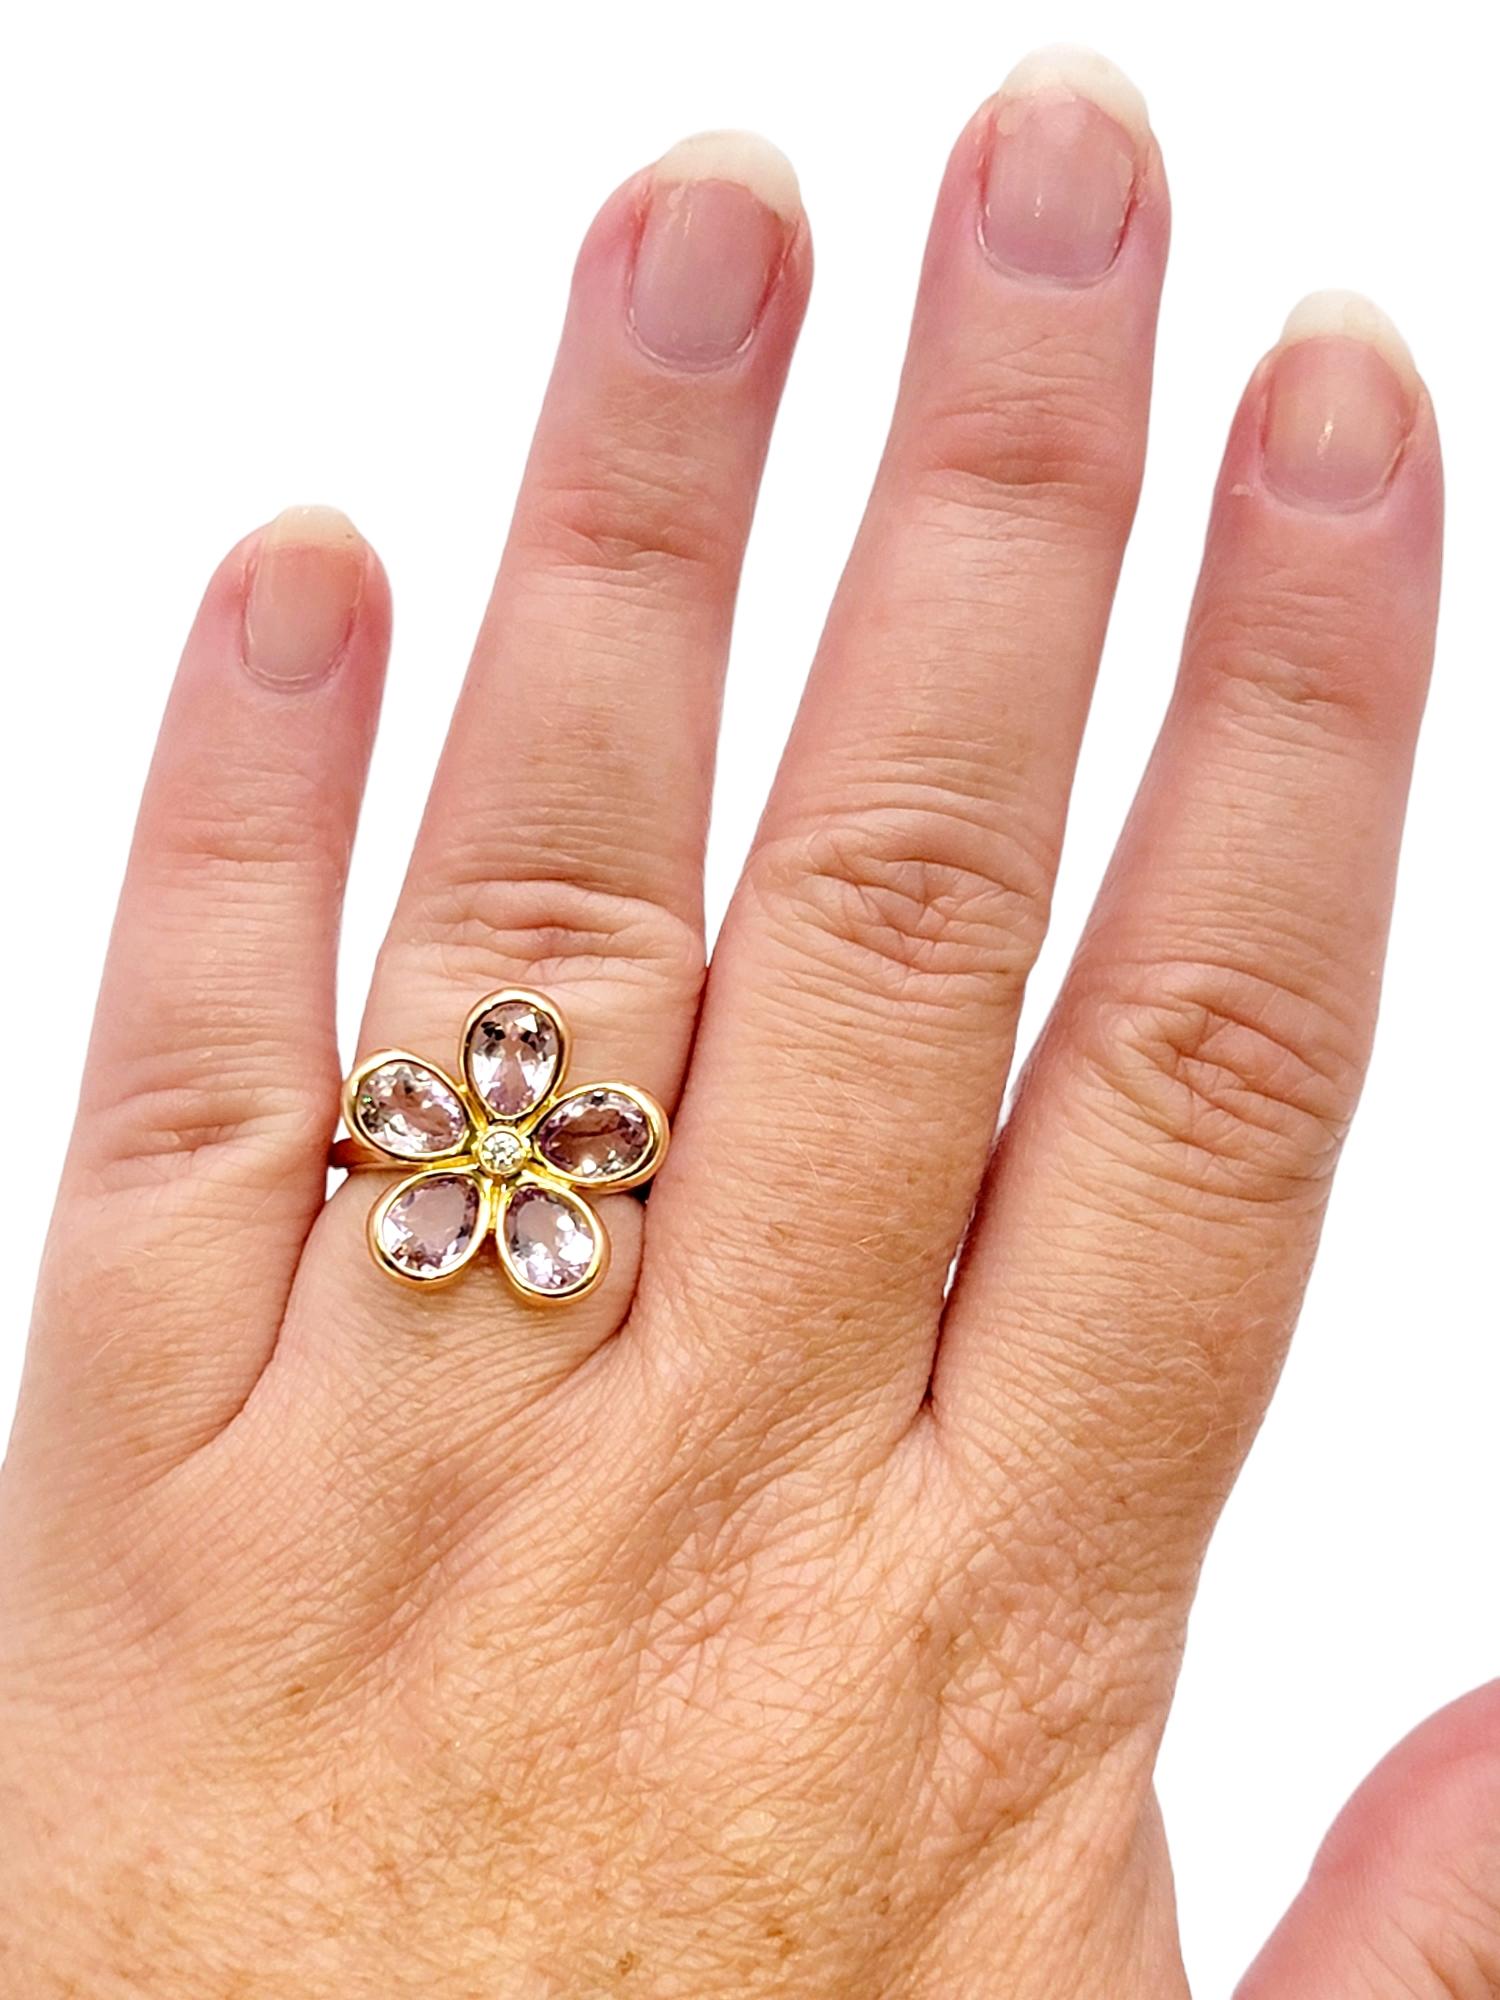 Tiffany & Co. Amethyst and Diamond Sparklers Flower Ring in 18 Karat Rose Gold 3